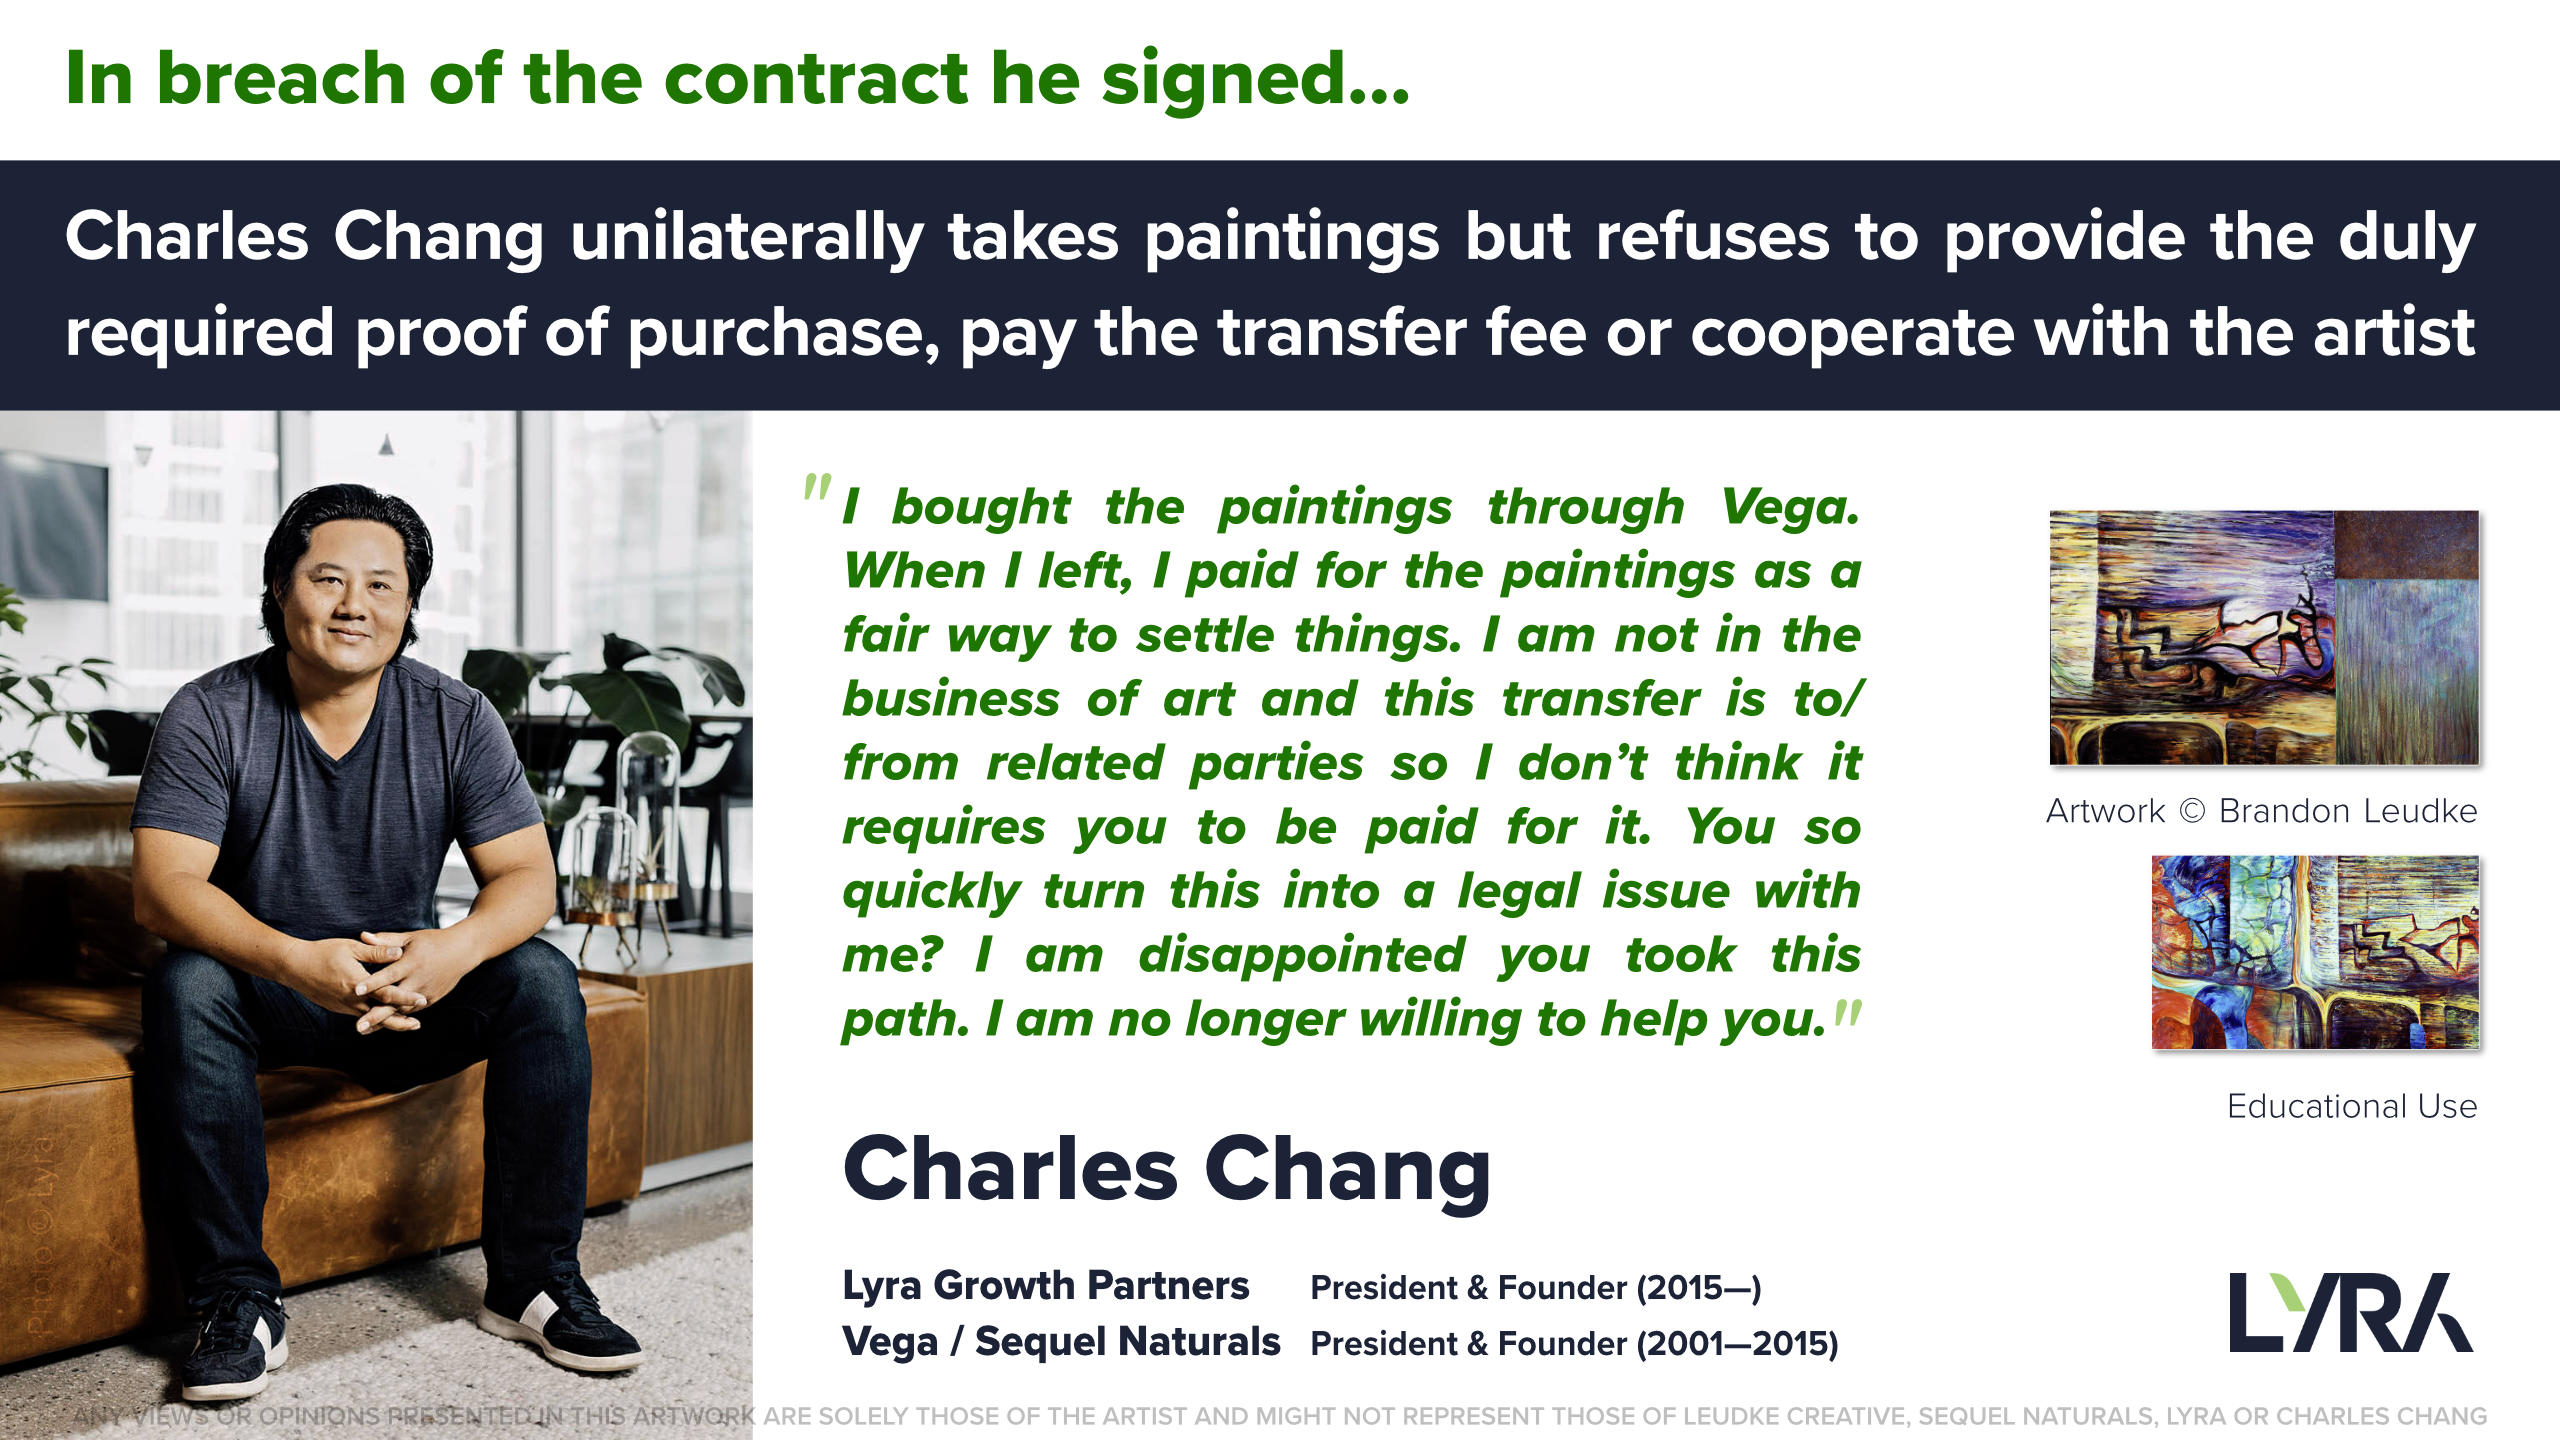 In breach of the contract he signed… Charles Chang unilaterally takes paintings but refuses to provide the duly
                                                  required proof of purchase, pay the transfer fee or cooperate with the artist